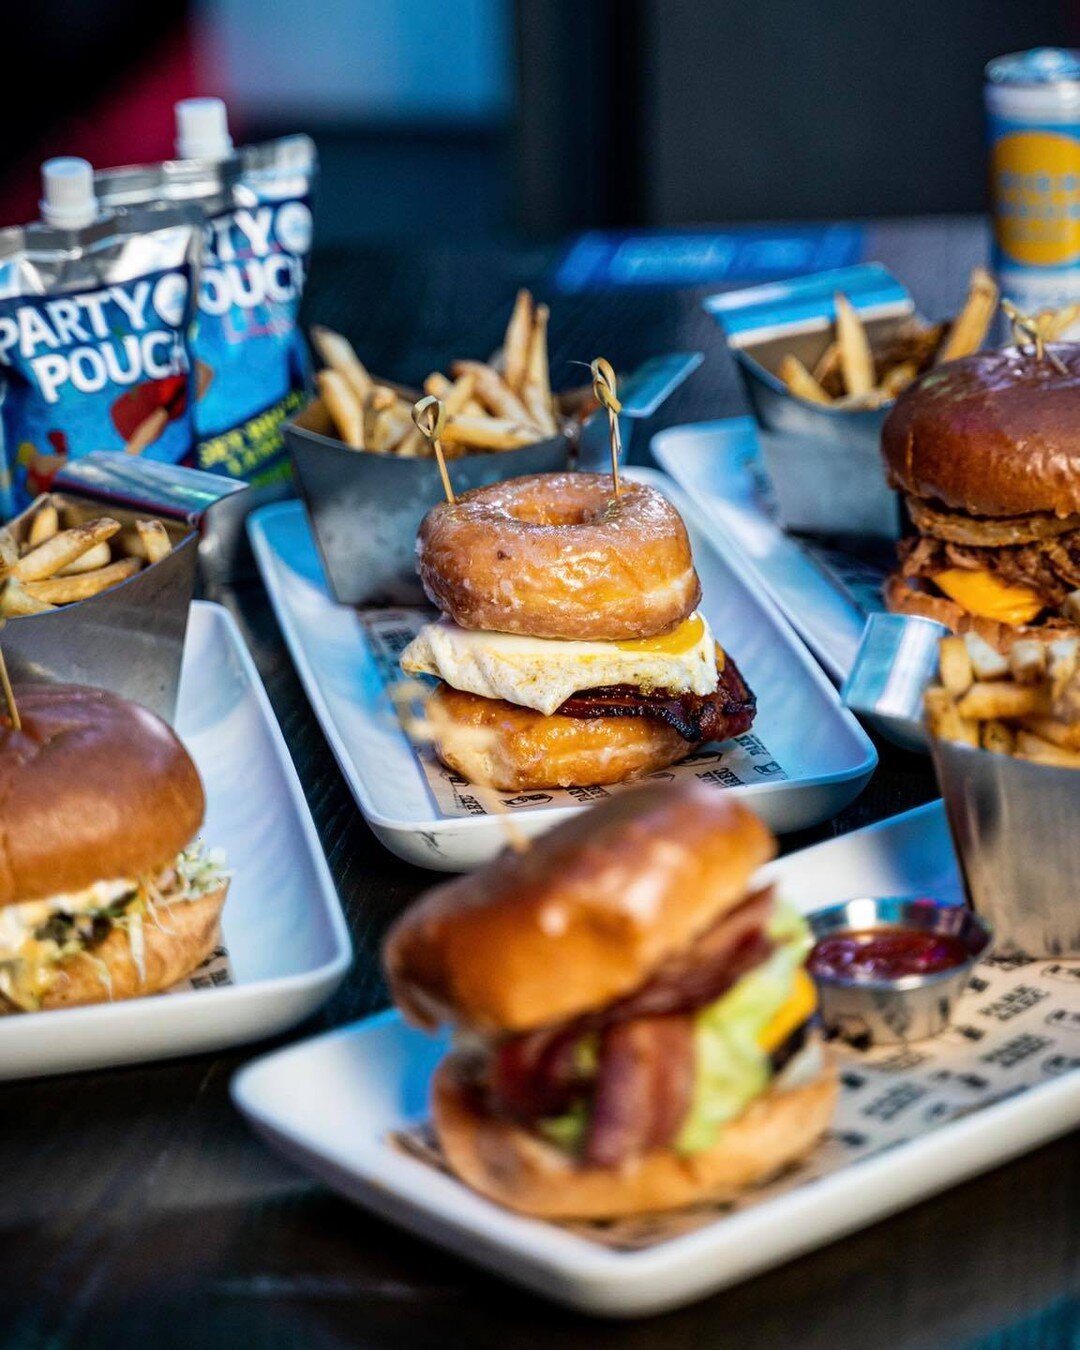 It&rsquo;s #SINsunday, with 50% off everything for the hospitality fam, so go ahead and order it all! 🍔🍗🍹 #ParkRecDTSP